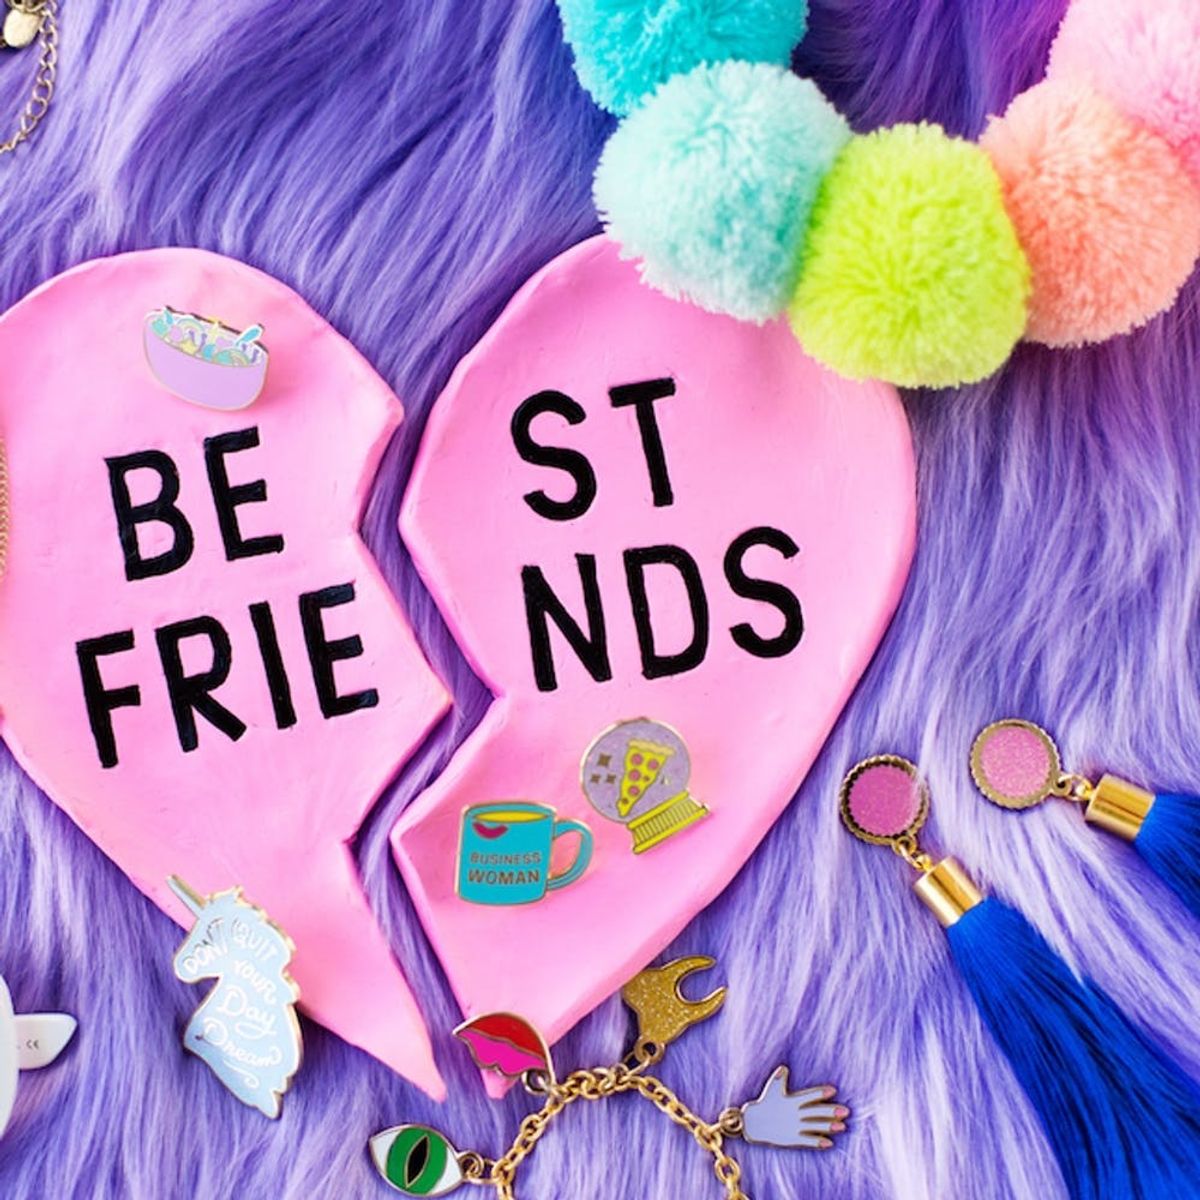 Emoji Heart Chocolate Boxes, BFF Ring Dishes + More DIYs to Make This Weekend